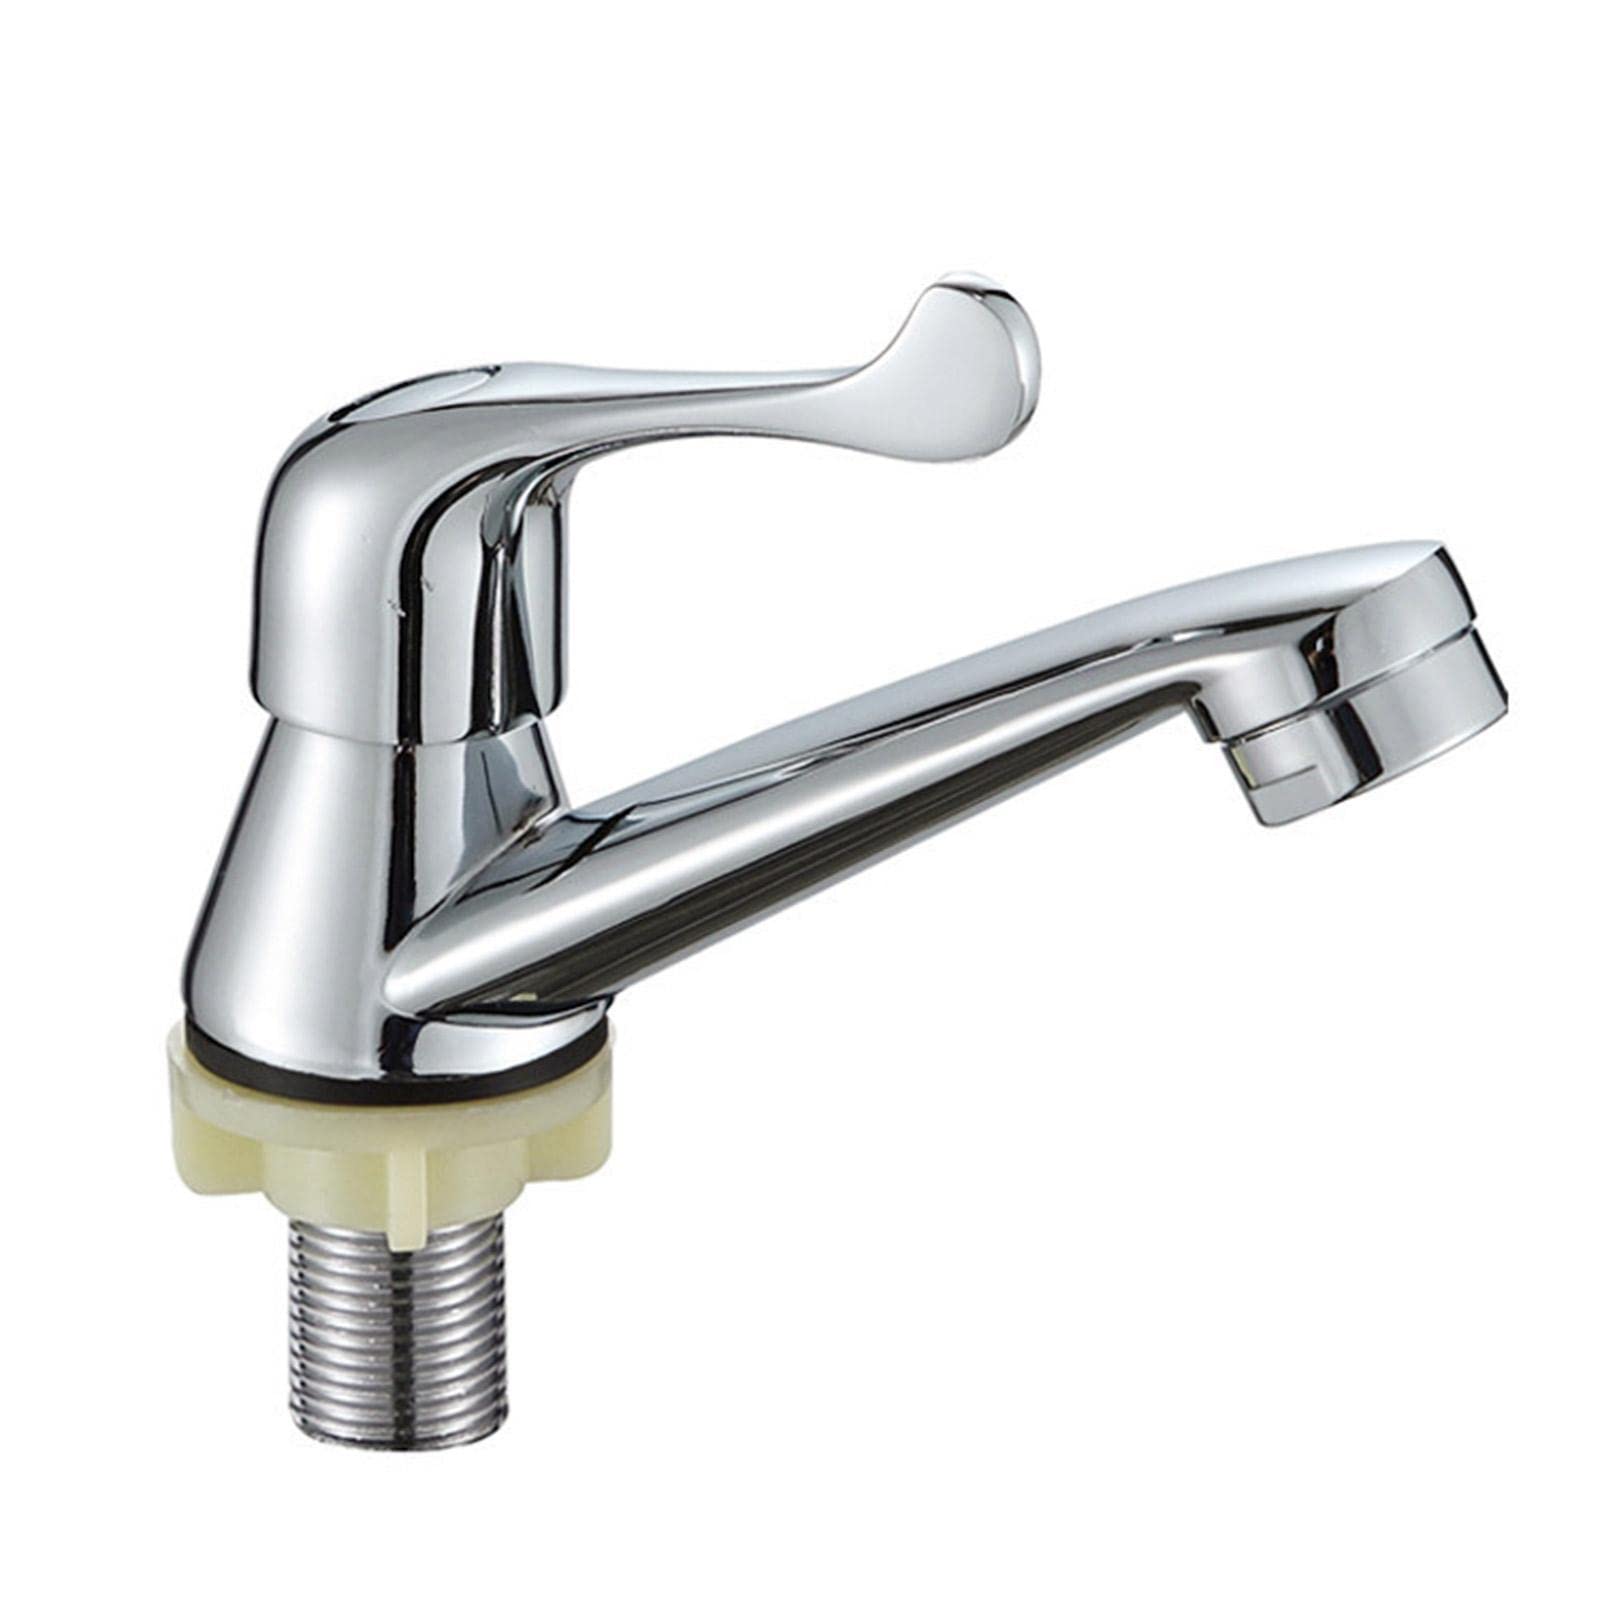 ZMShenMa Cold Water Faucet